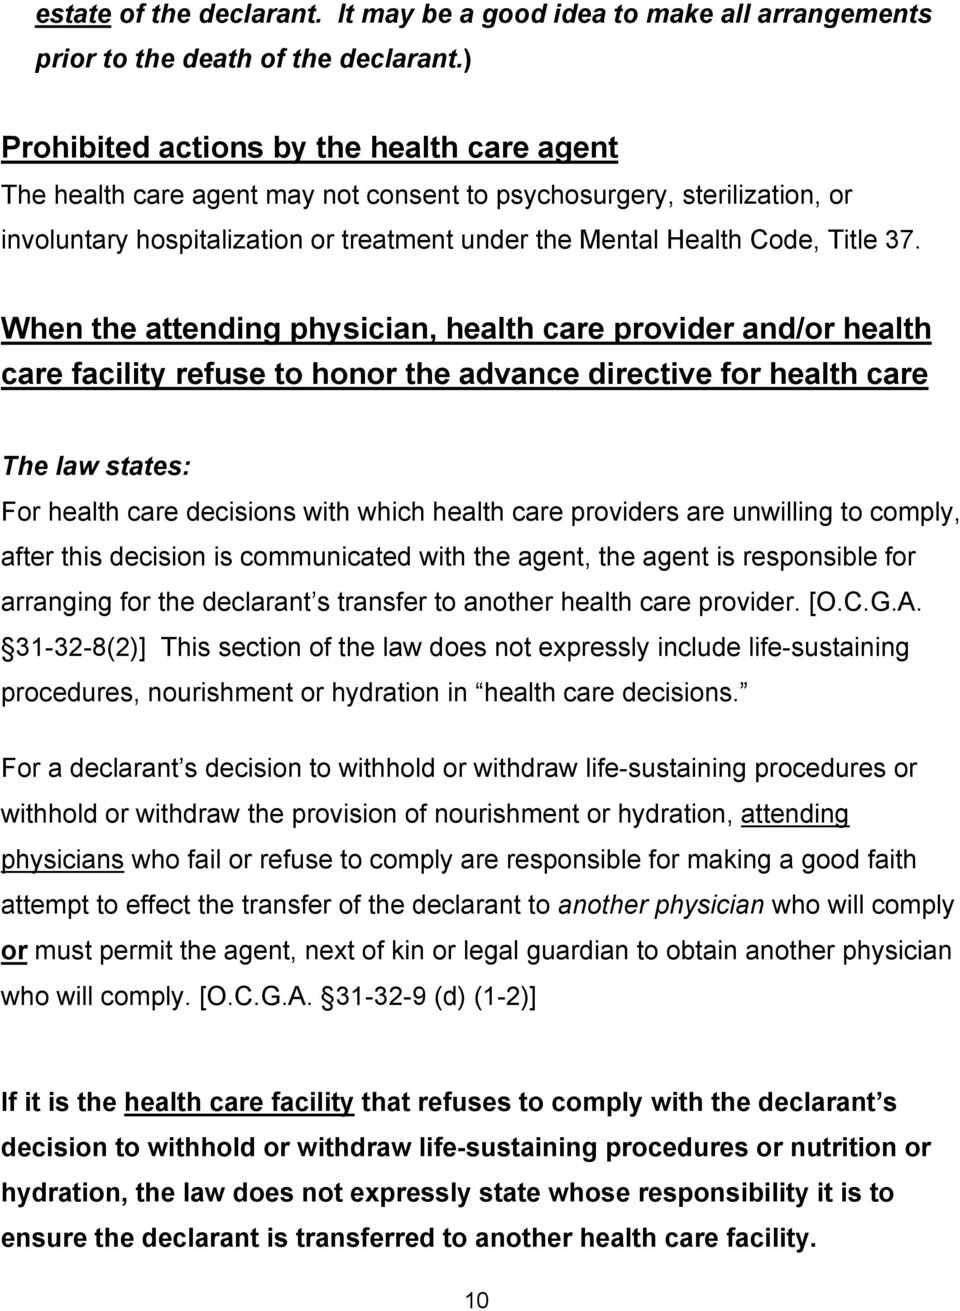 When the attending physician, health care provider and/or health care facility refuse to honor the advance directive for health care The law states: For health care decisions with which health care